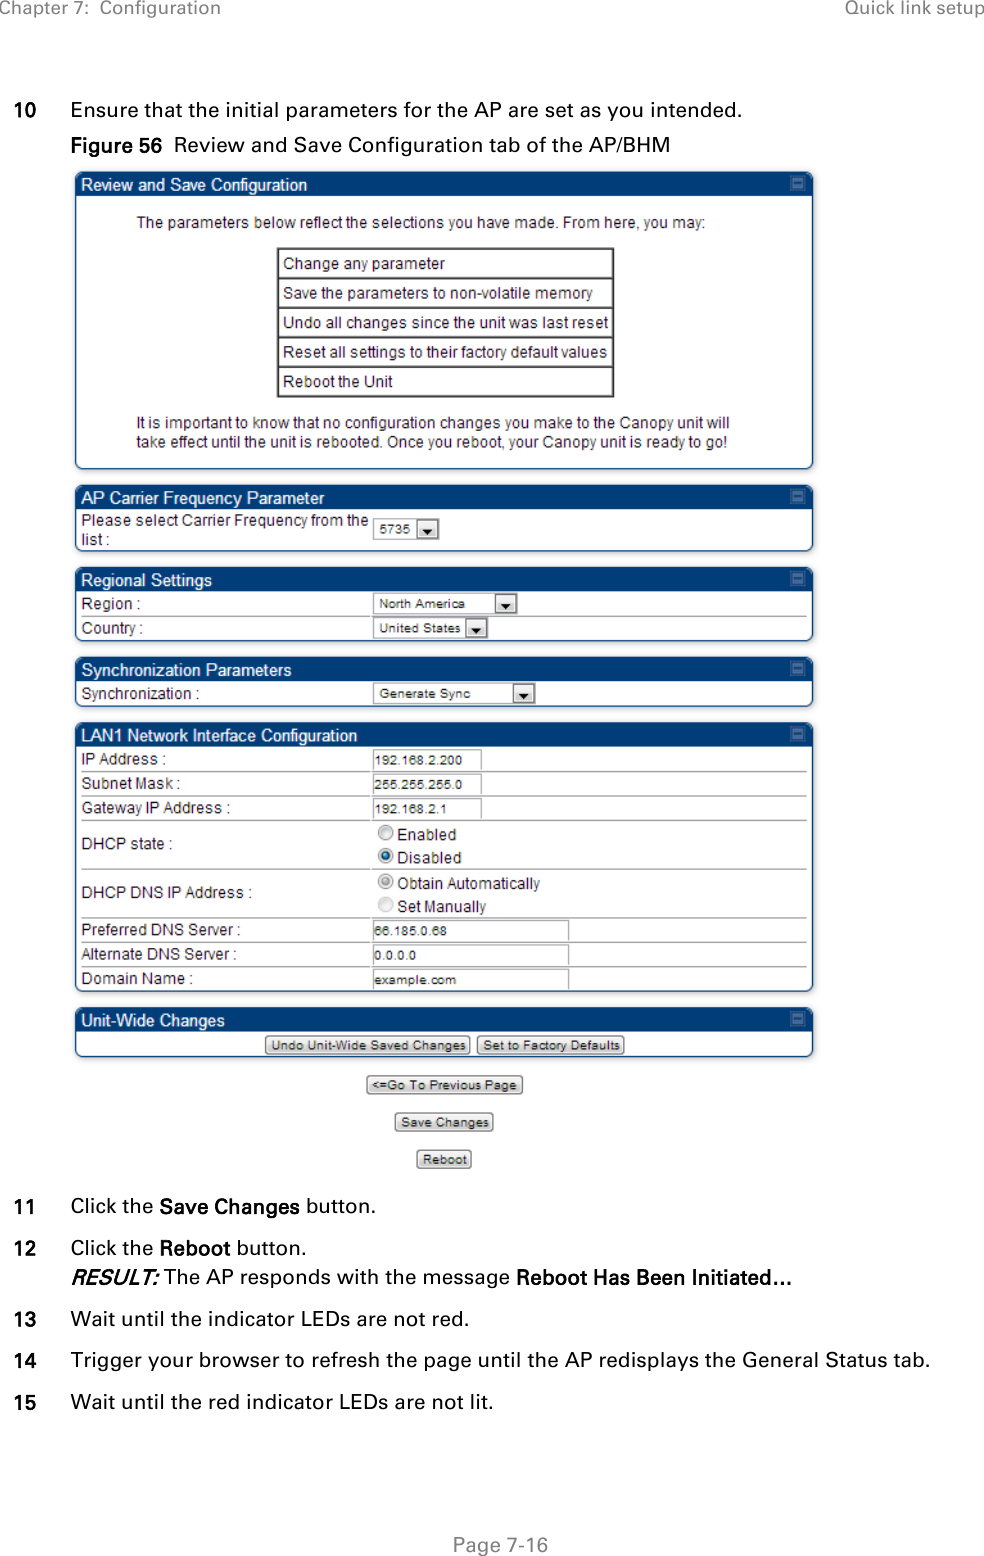 Chapter 7:  Configuration Quick link setup   Page 7-16 10 Ensure that the initial parameters for the AP are set as you intended. Figure 56  Review and Save Configuration tab of the AP/BHM  11 Click the Save Changes button. 12 Click the Reboot button. RESULT: The AP responds with the message Reboot Has Been Initiated… 13 Wait until the indicator LEDs are not red.  14 Trigger your browser to refresh the page until the AP redisplays the General Status tab.  15 Wait until the red indicator LEDs are not lit. 